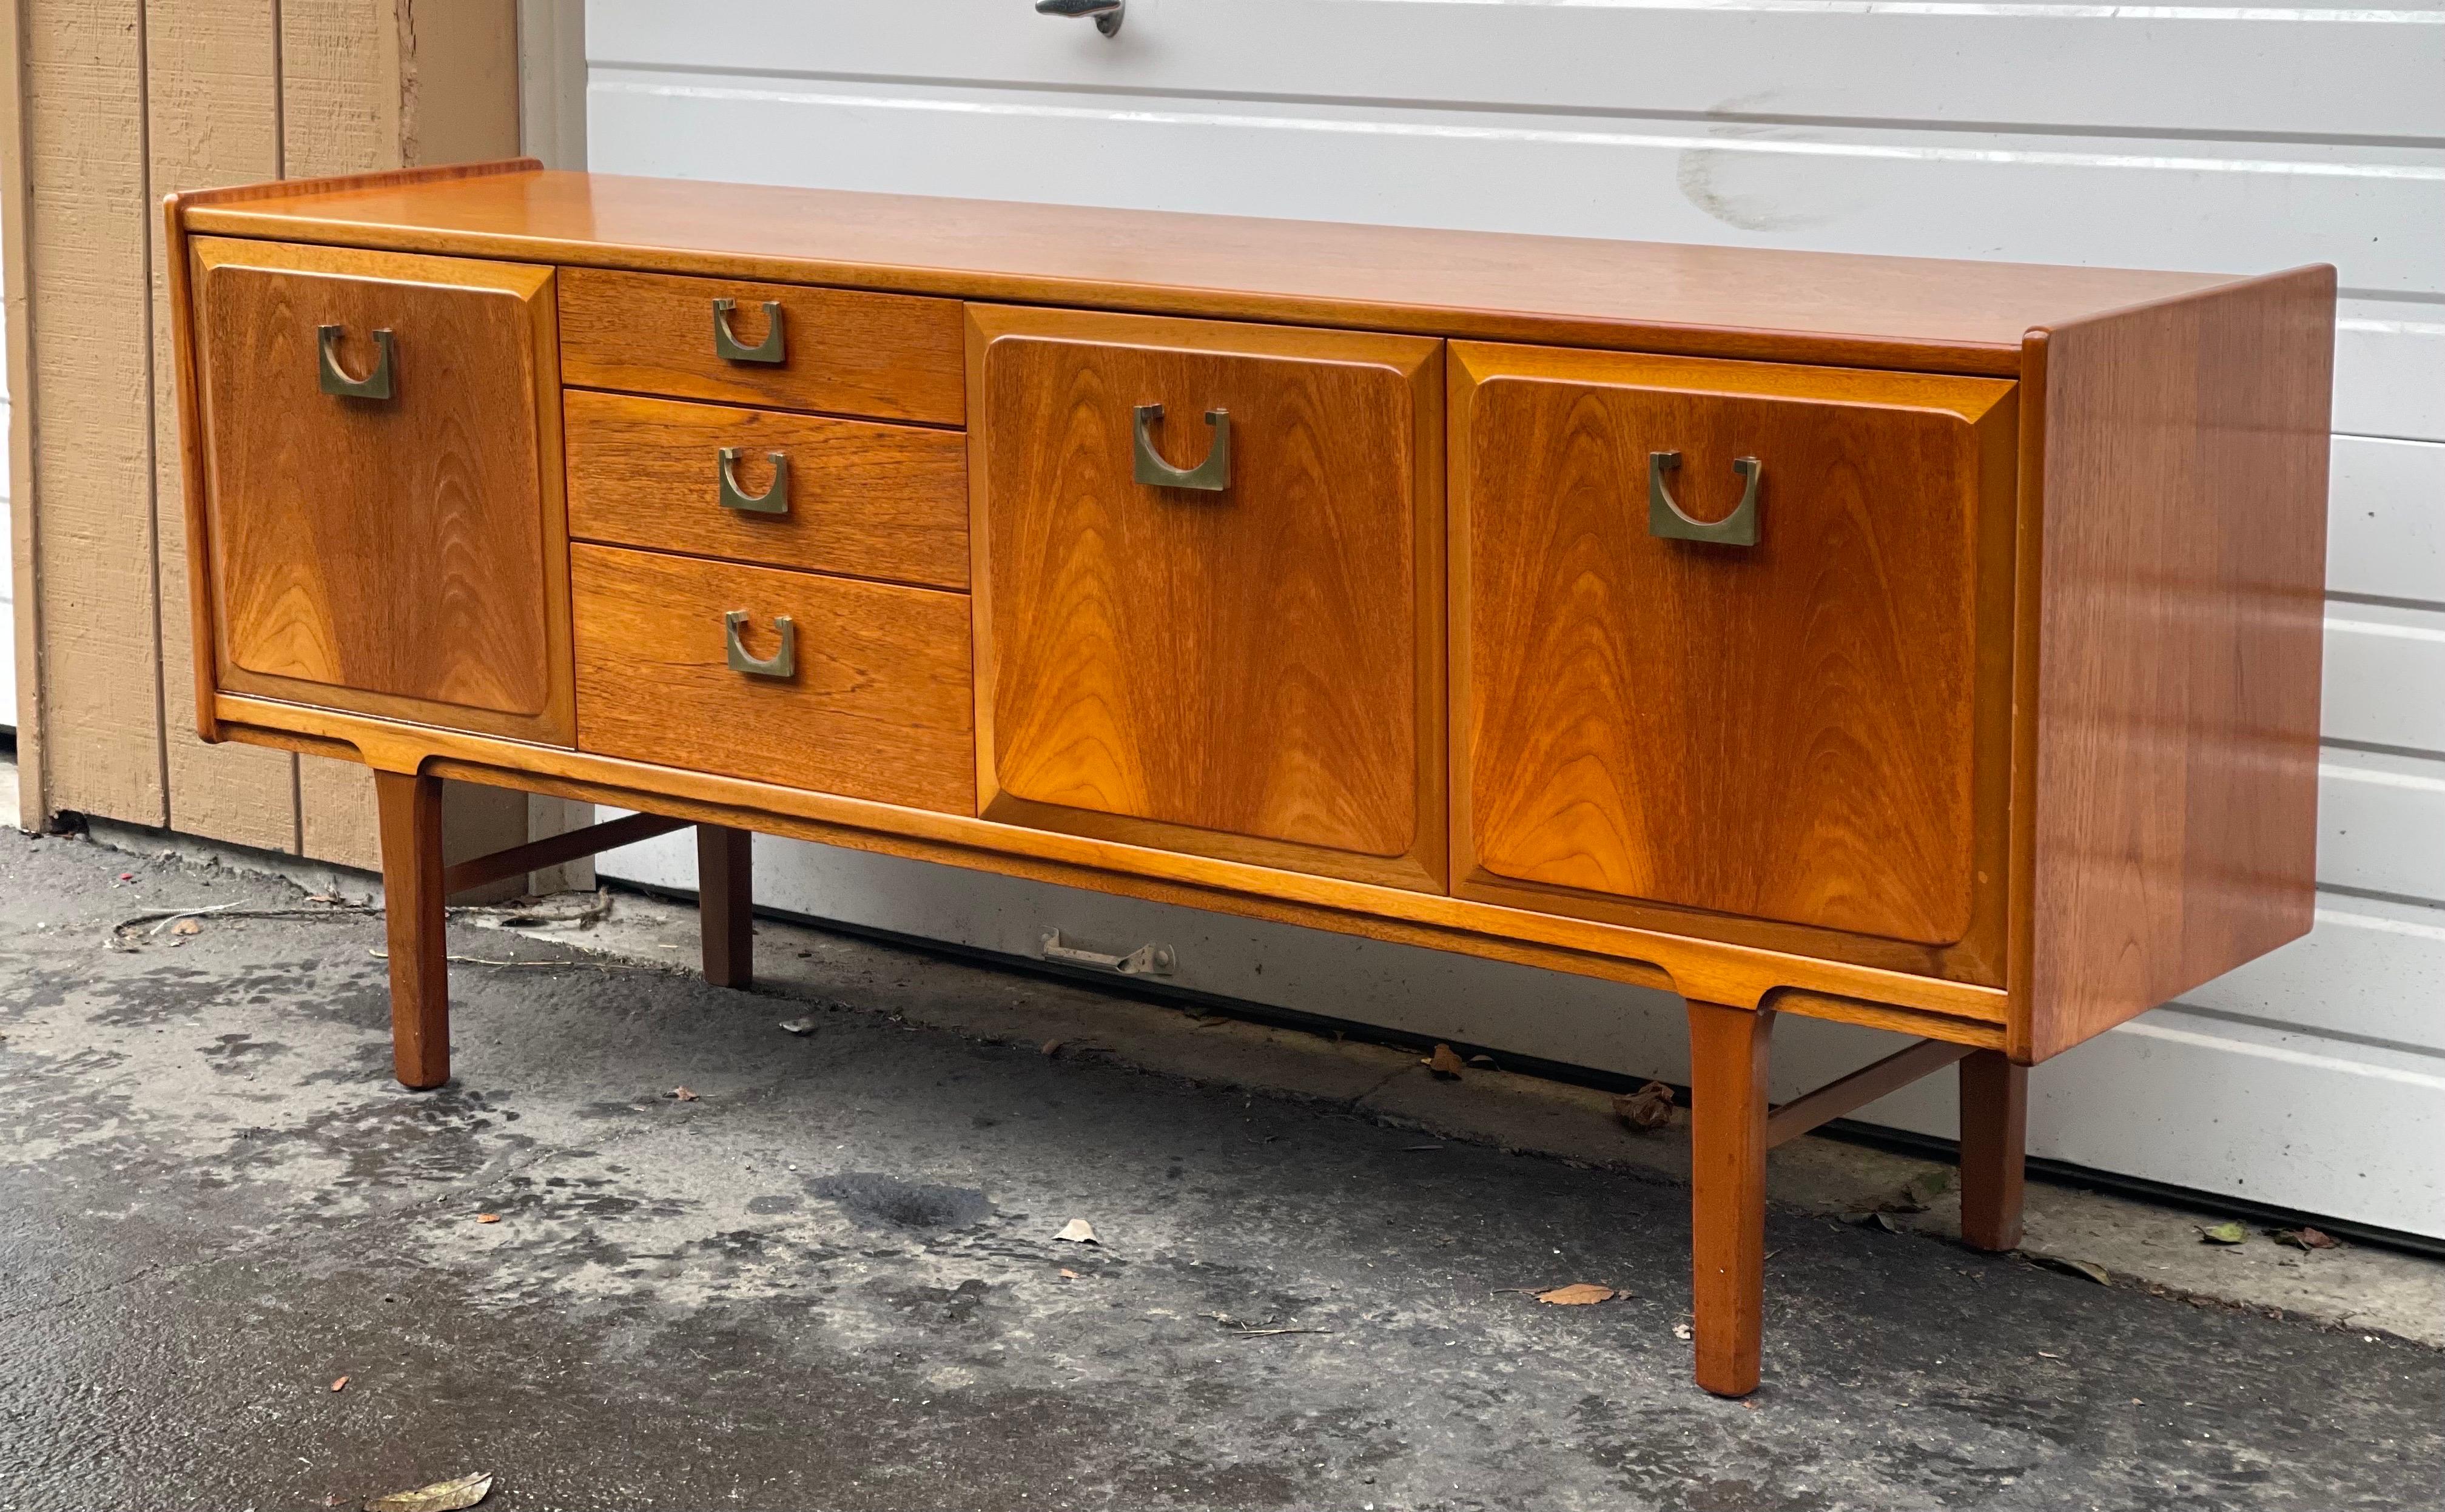 Vintage Mid-Century Modern credenza bar/record cabinet. UK Import.

Dimensions. 72 1/2 W ; 17 1/2 D ; 31 H.